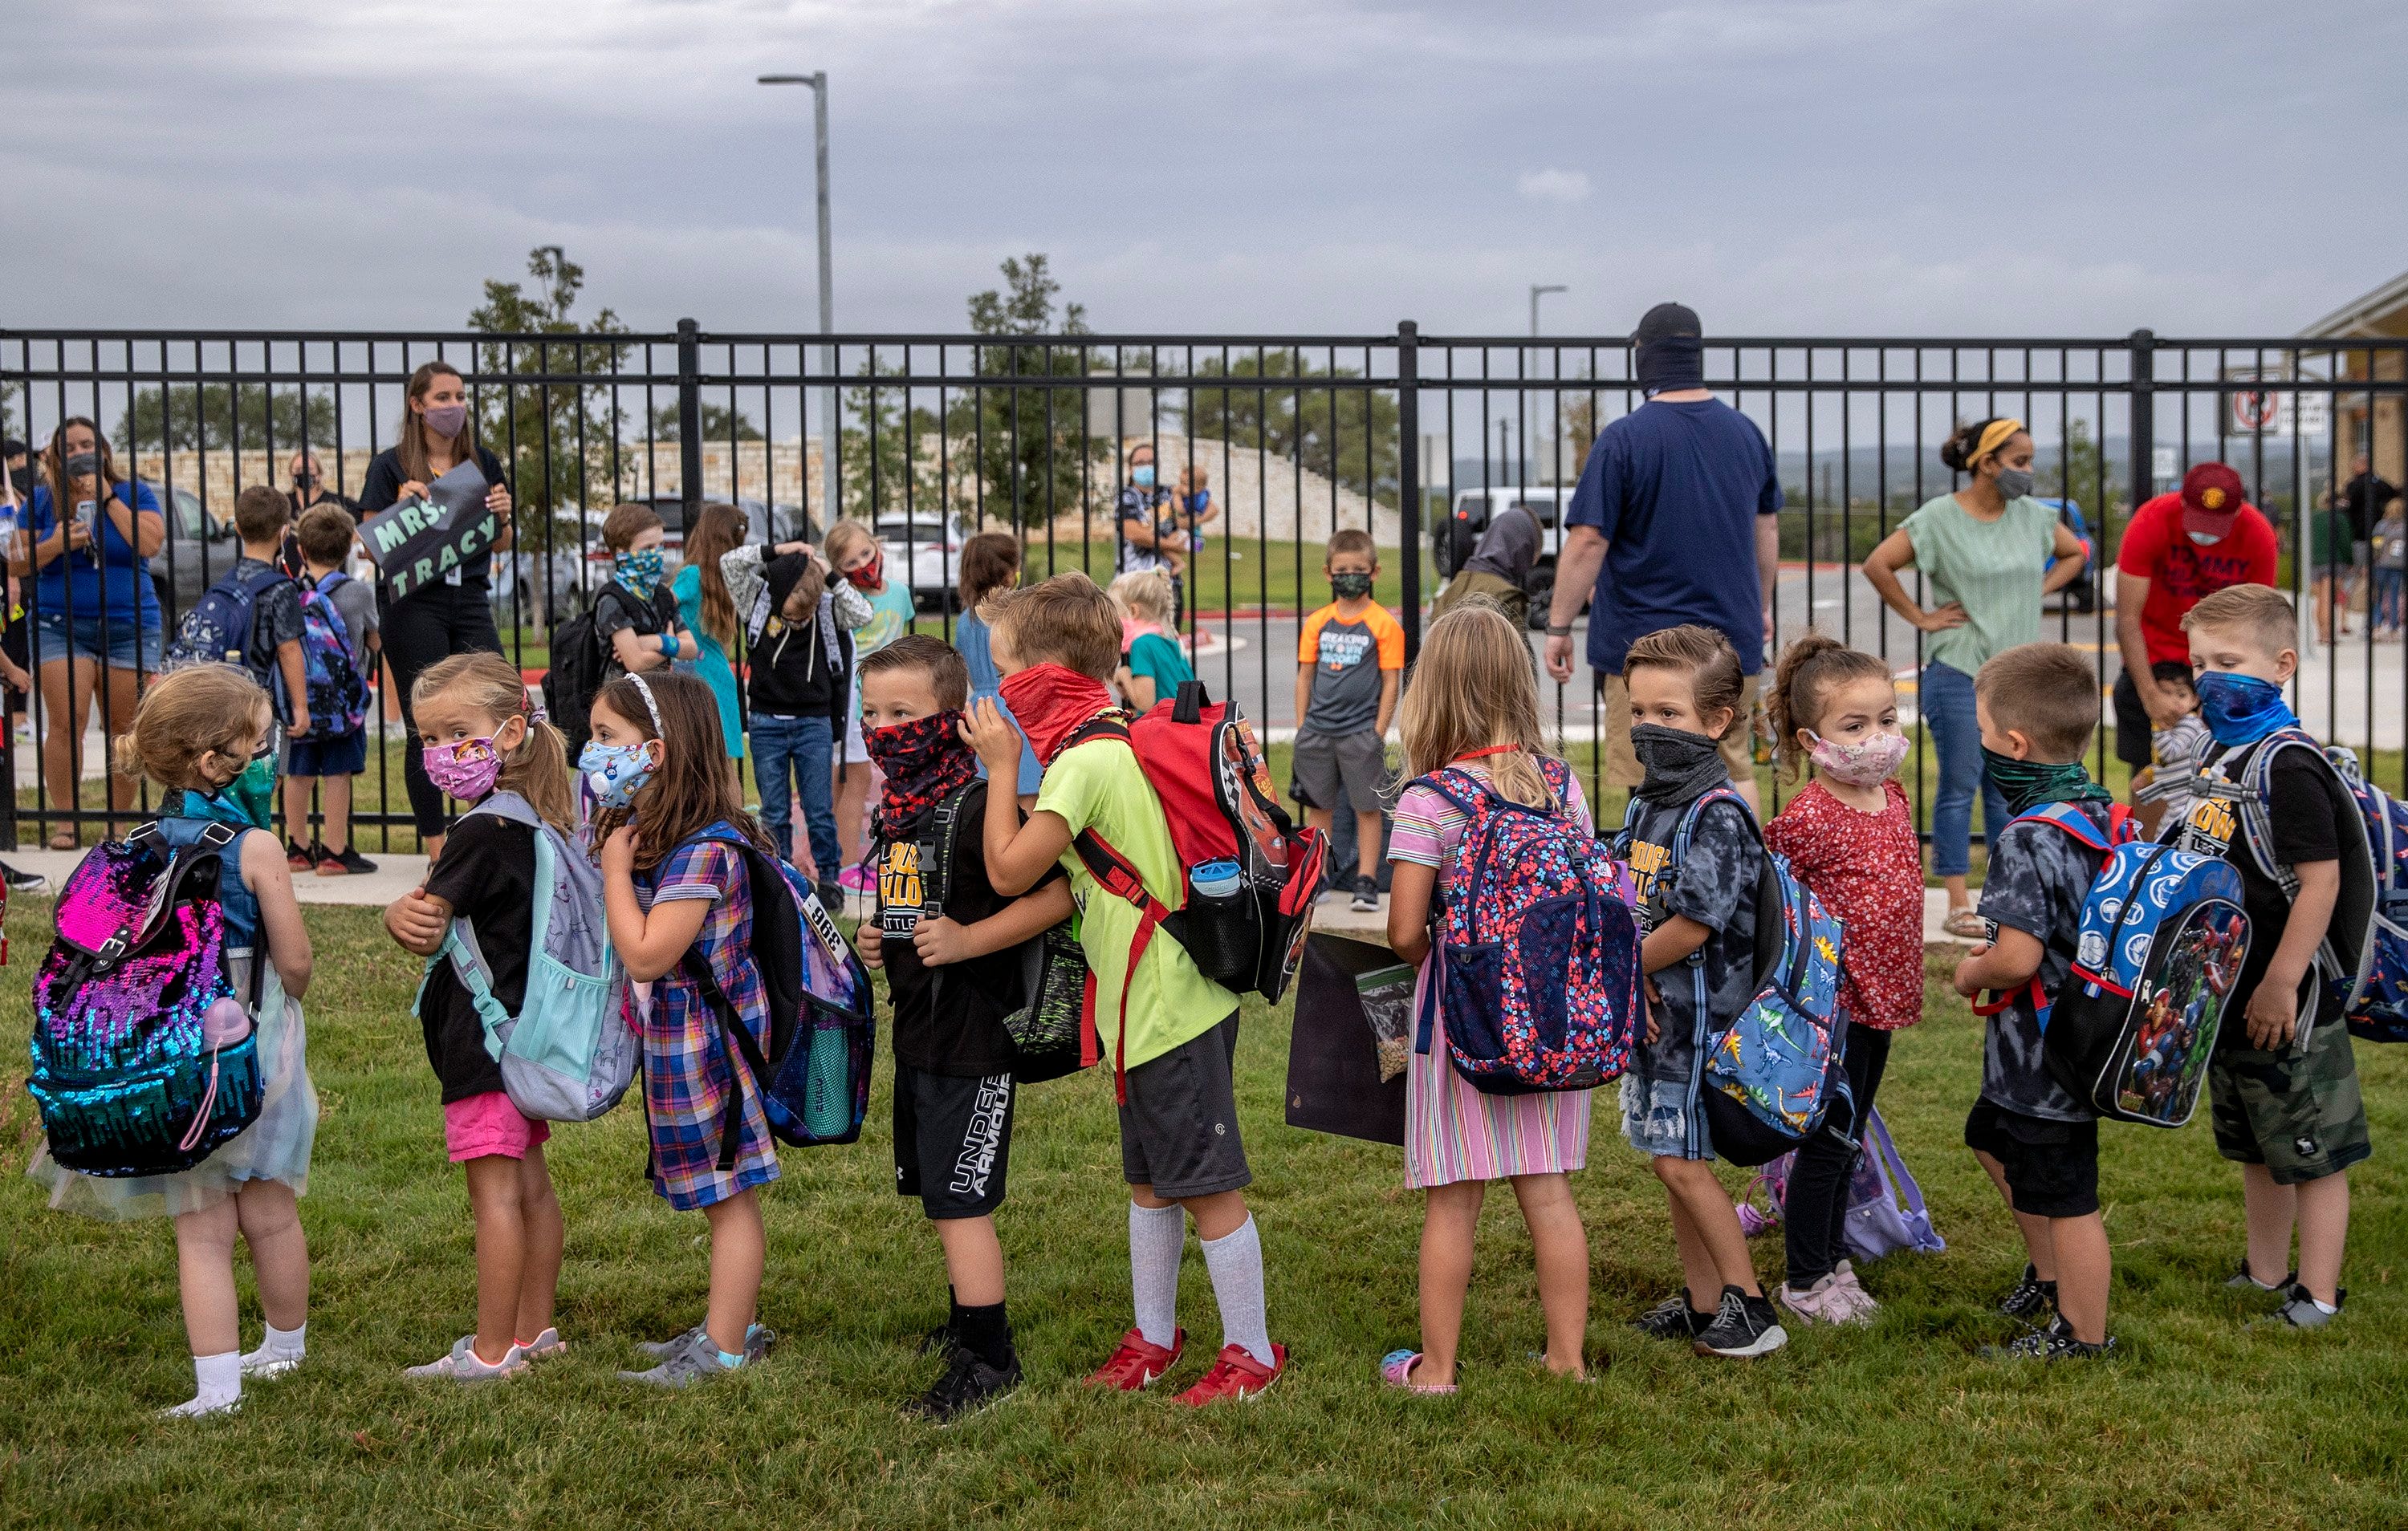 Students line up on the first day of school at Rough Hollow Elementary School in Spicewood on Tuesday September 8, 2020.